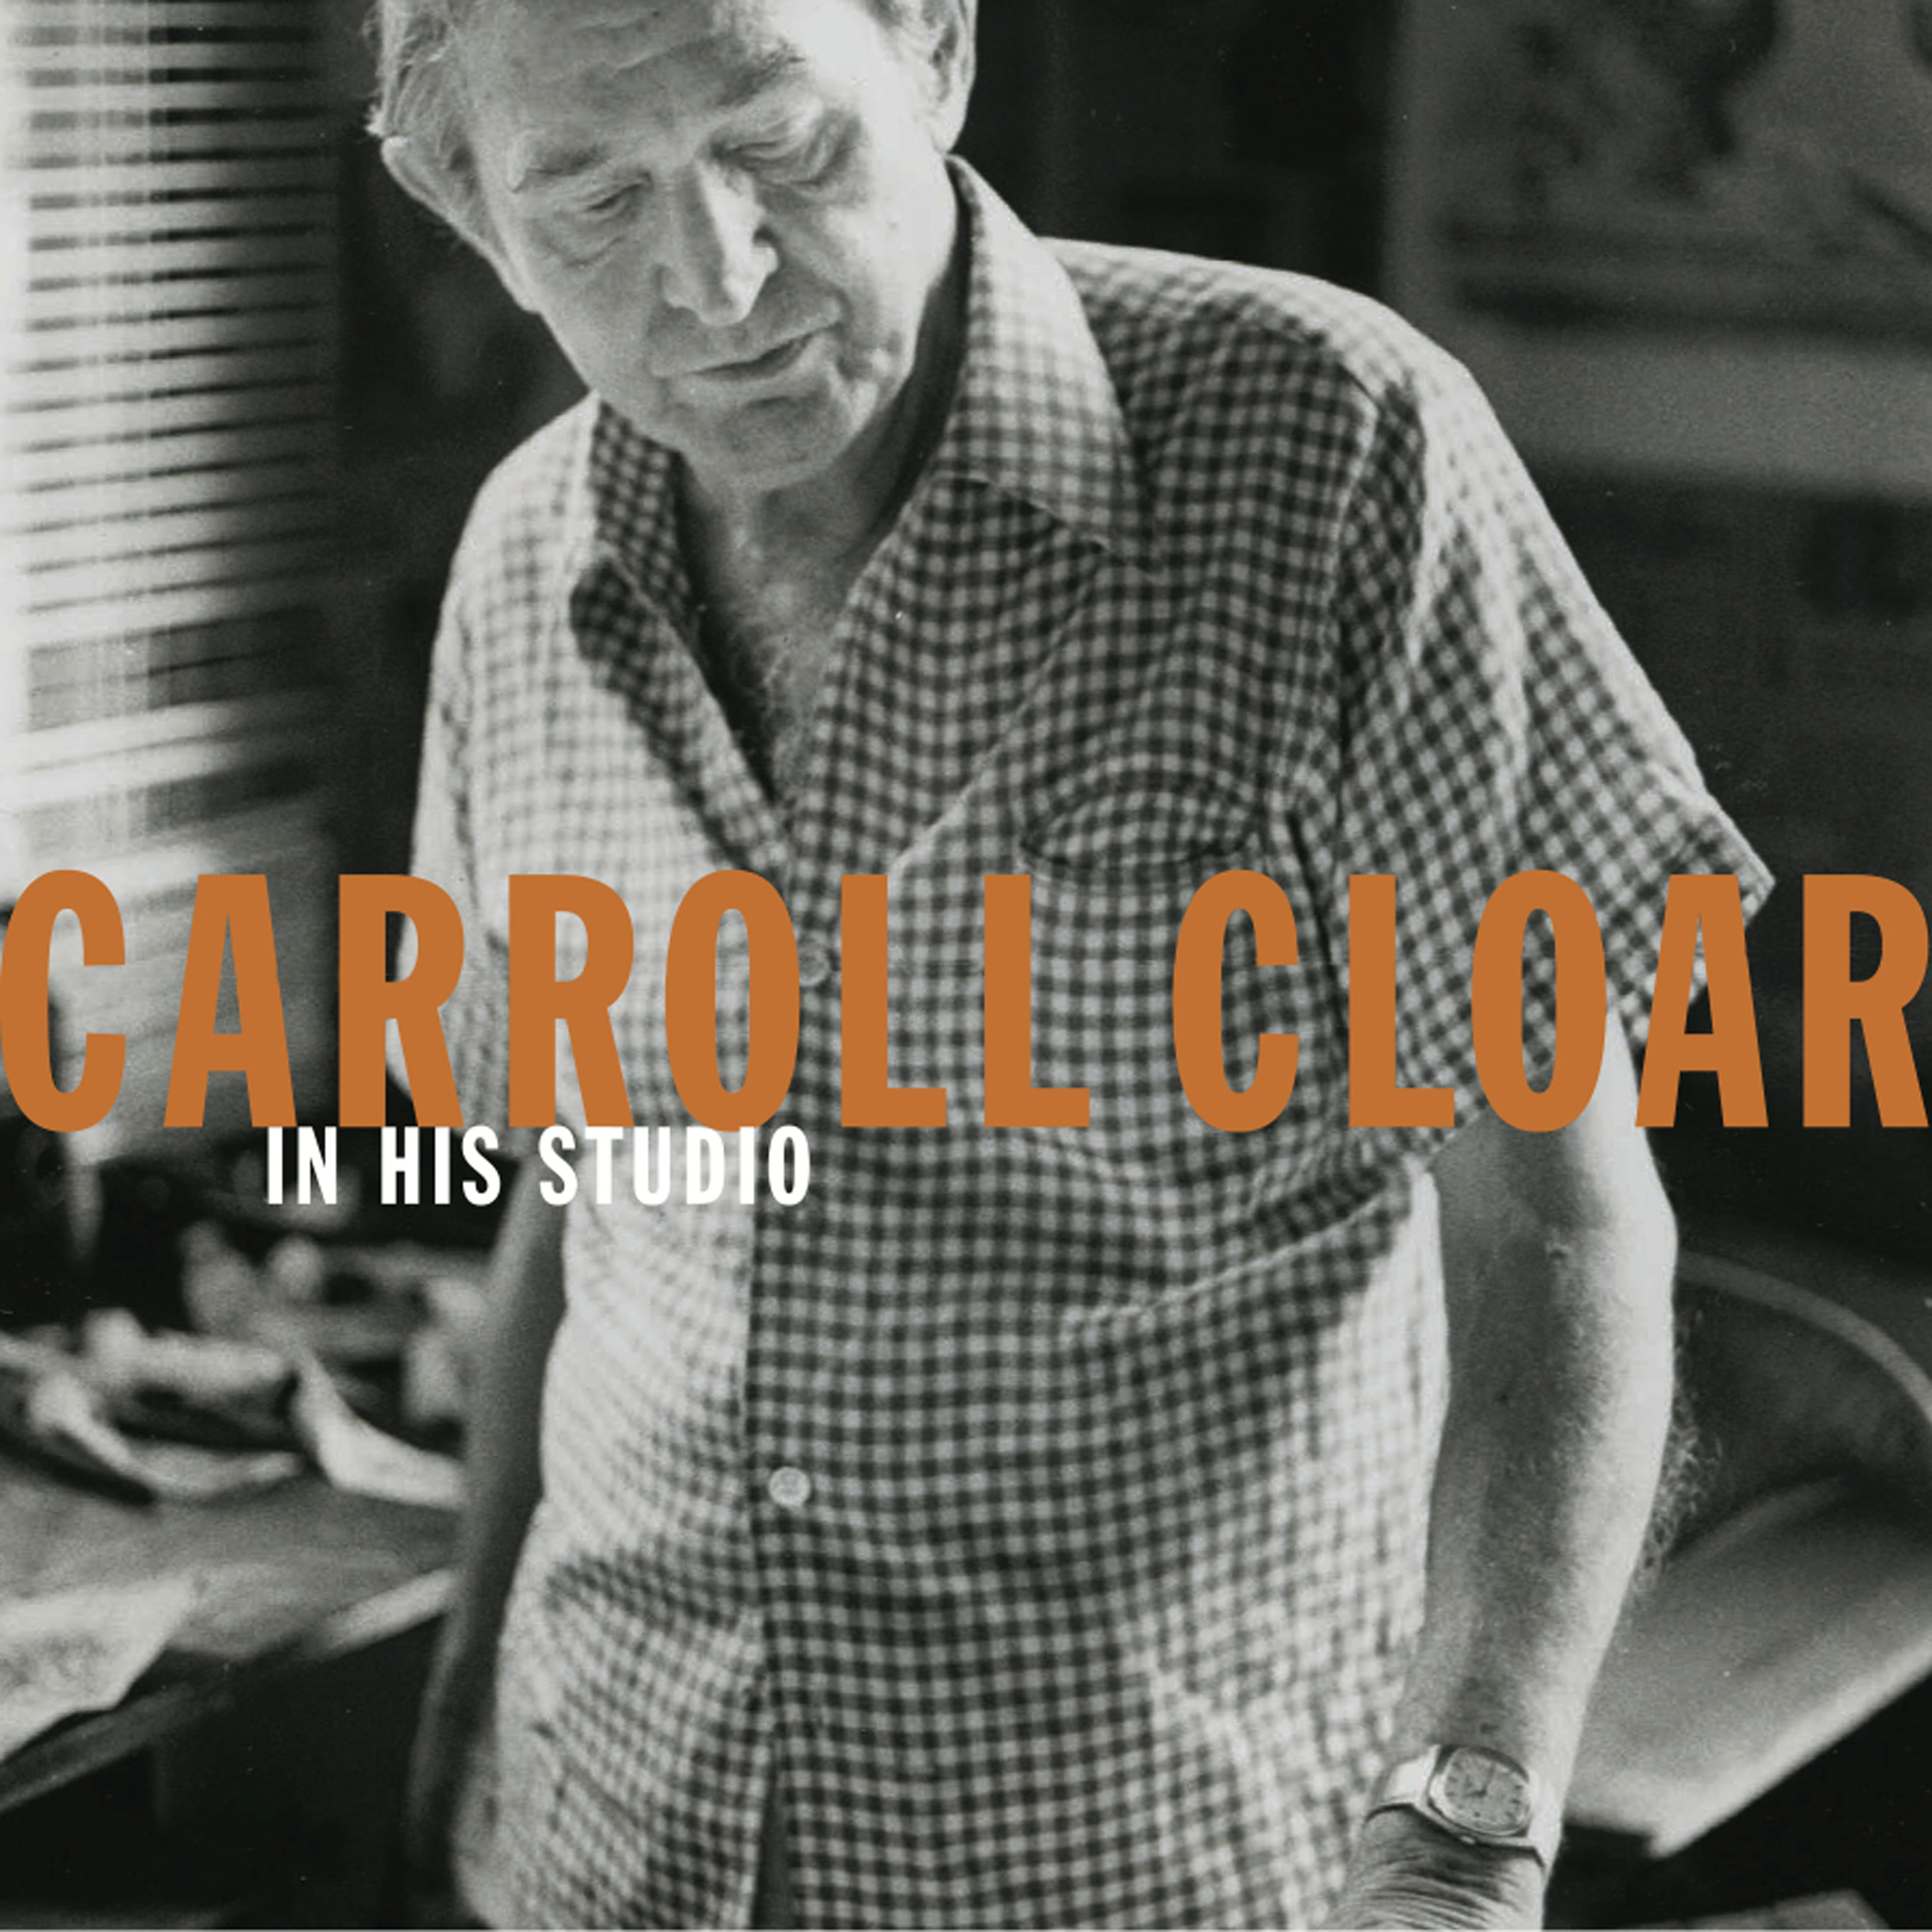  Carroll Cloar in His Studio  Exhibition catalog, 96 pages  Creative direction and design by Chuck Mitchell  Published by University Press of Mississippi and AMUM, Art Museum of the University of Memphis 